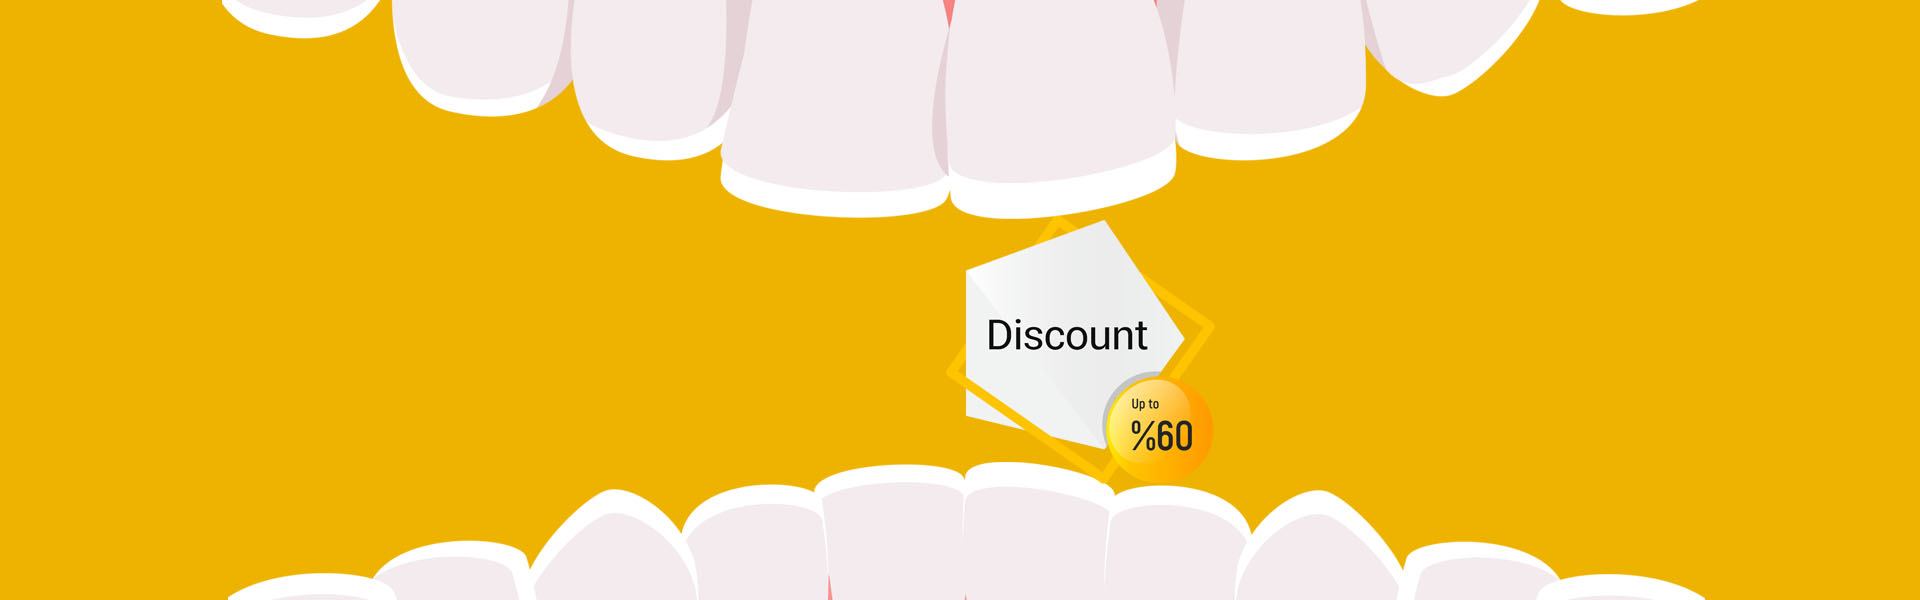 teeth whitening discount offer